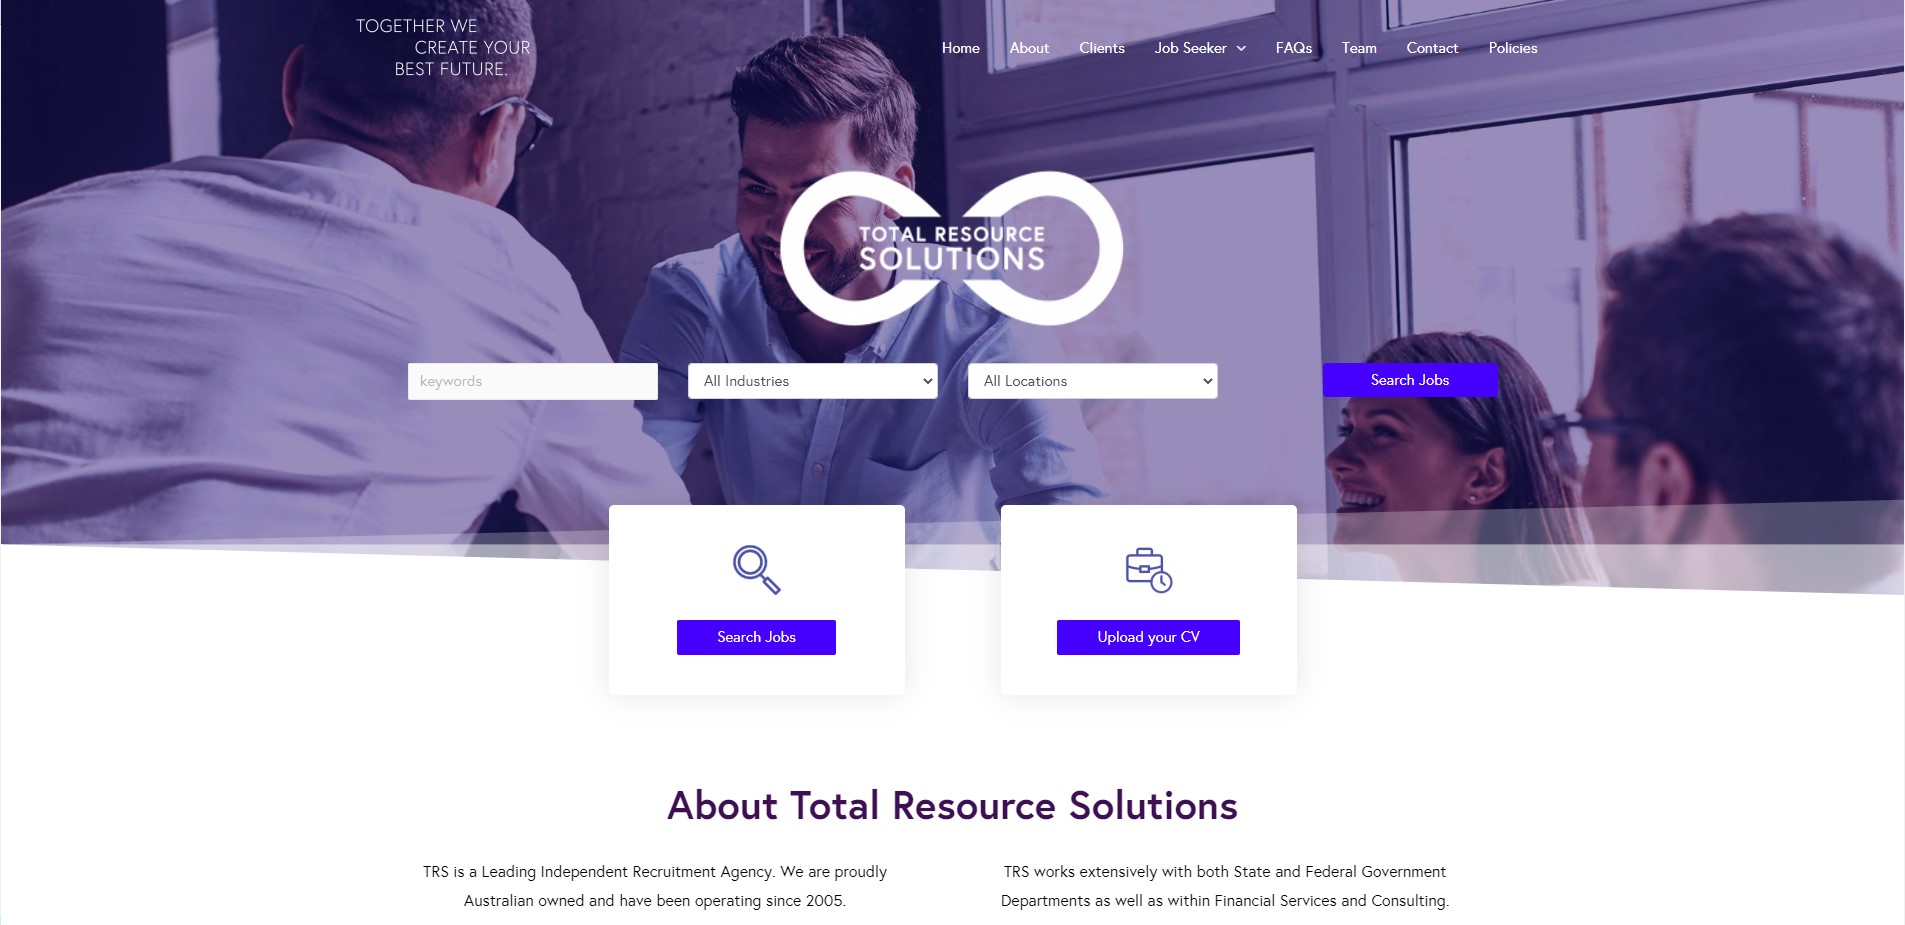 Total Resource Solutions Image